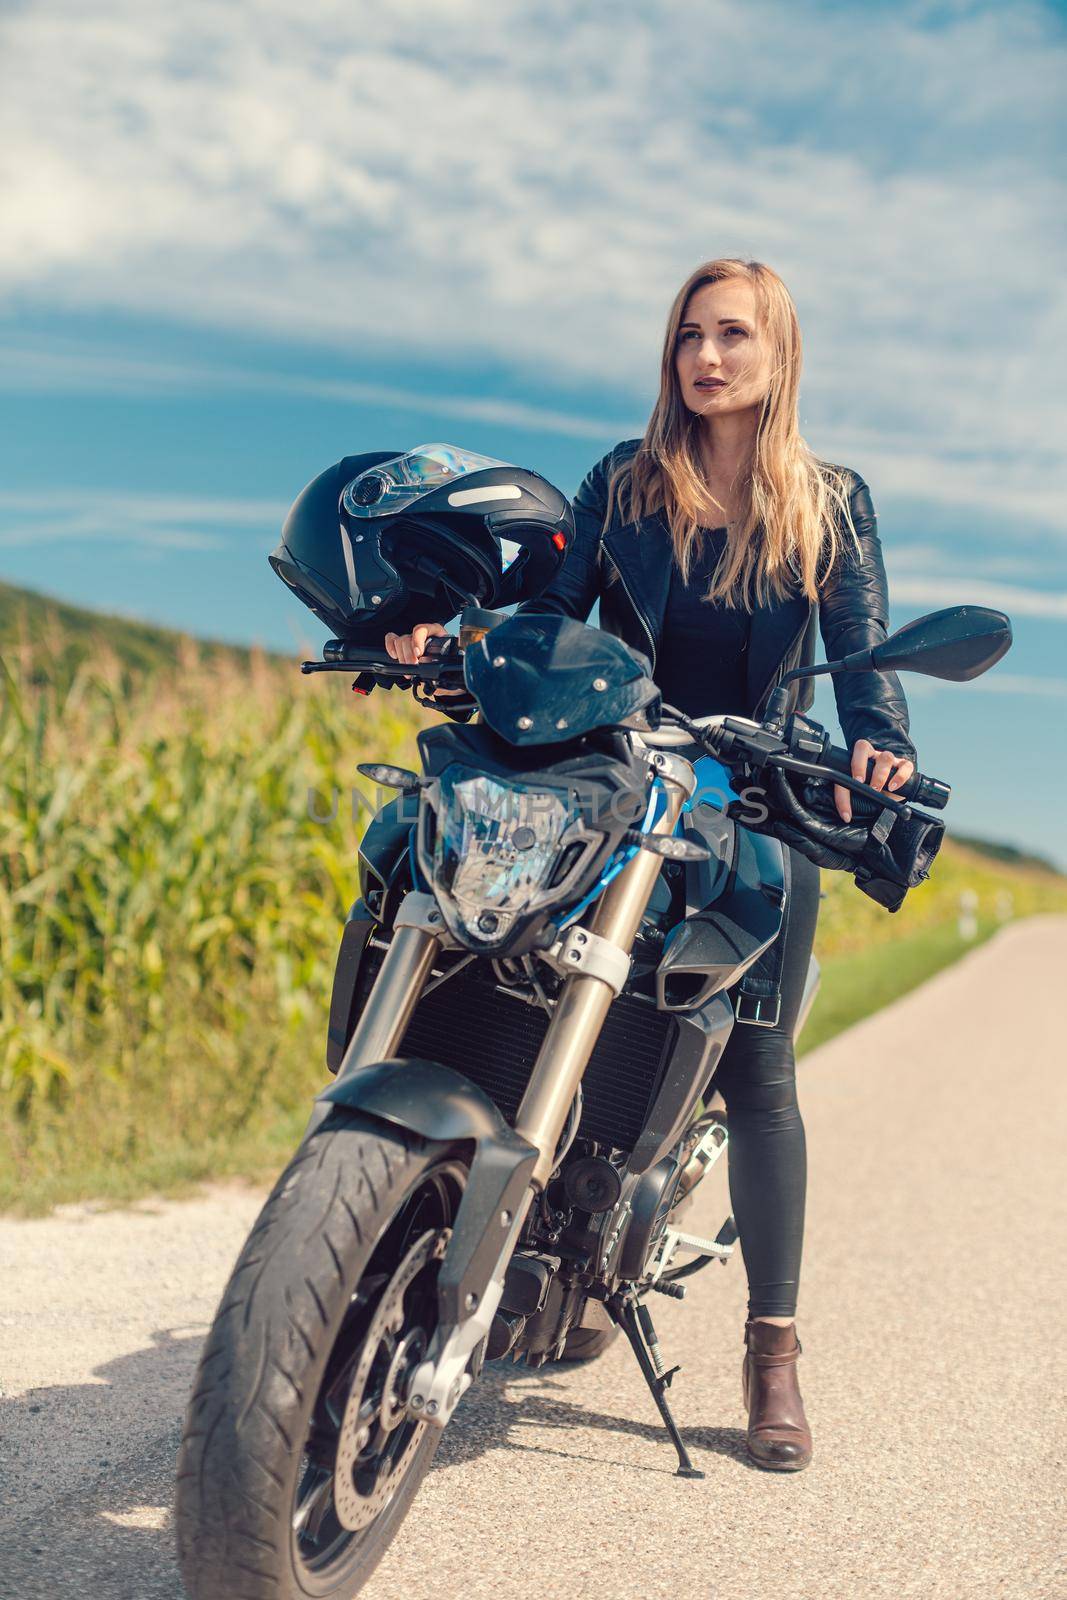 Beautiful woman on a motorcycle looking at the road ahead on summer day